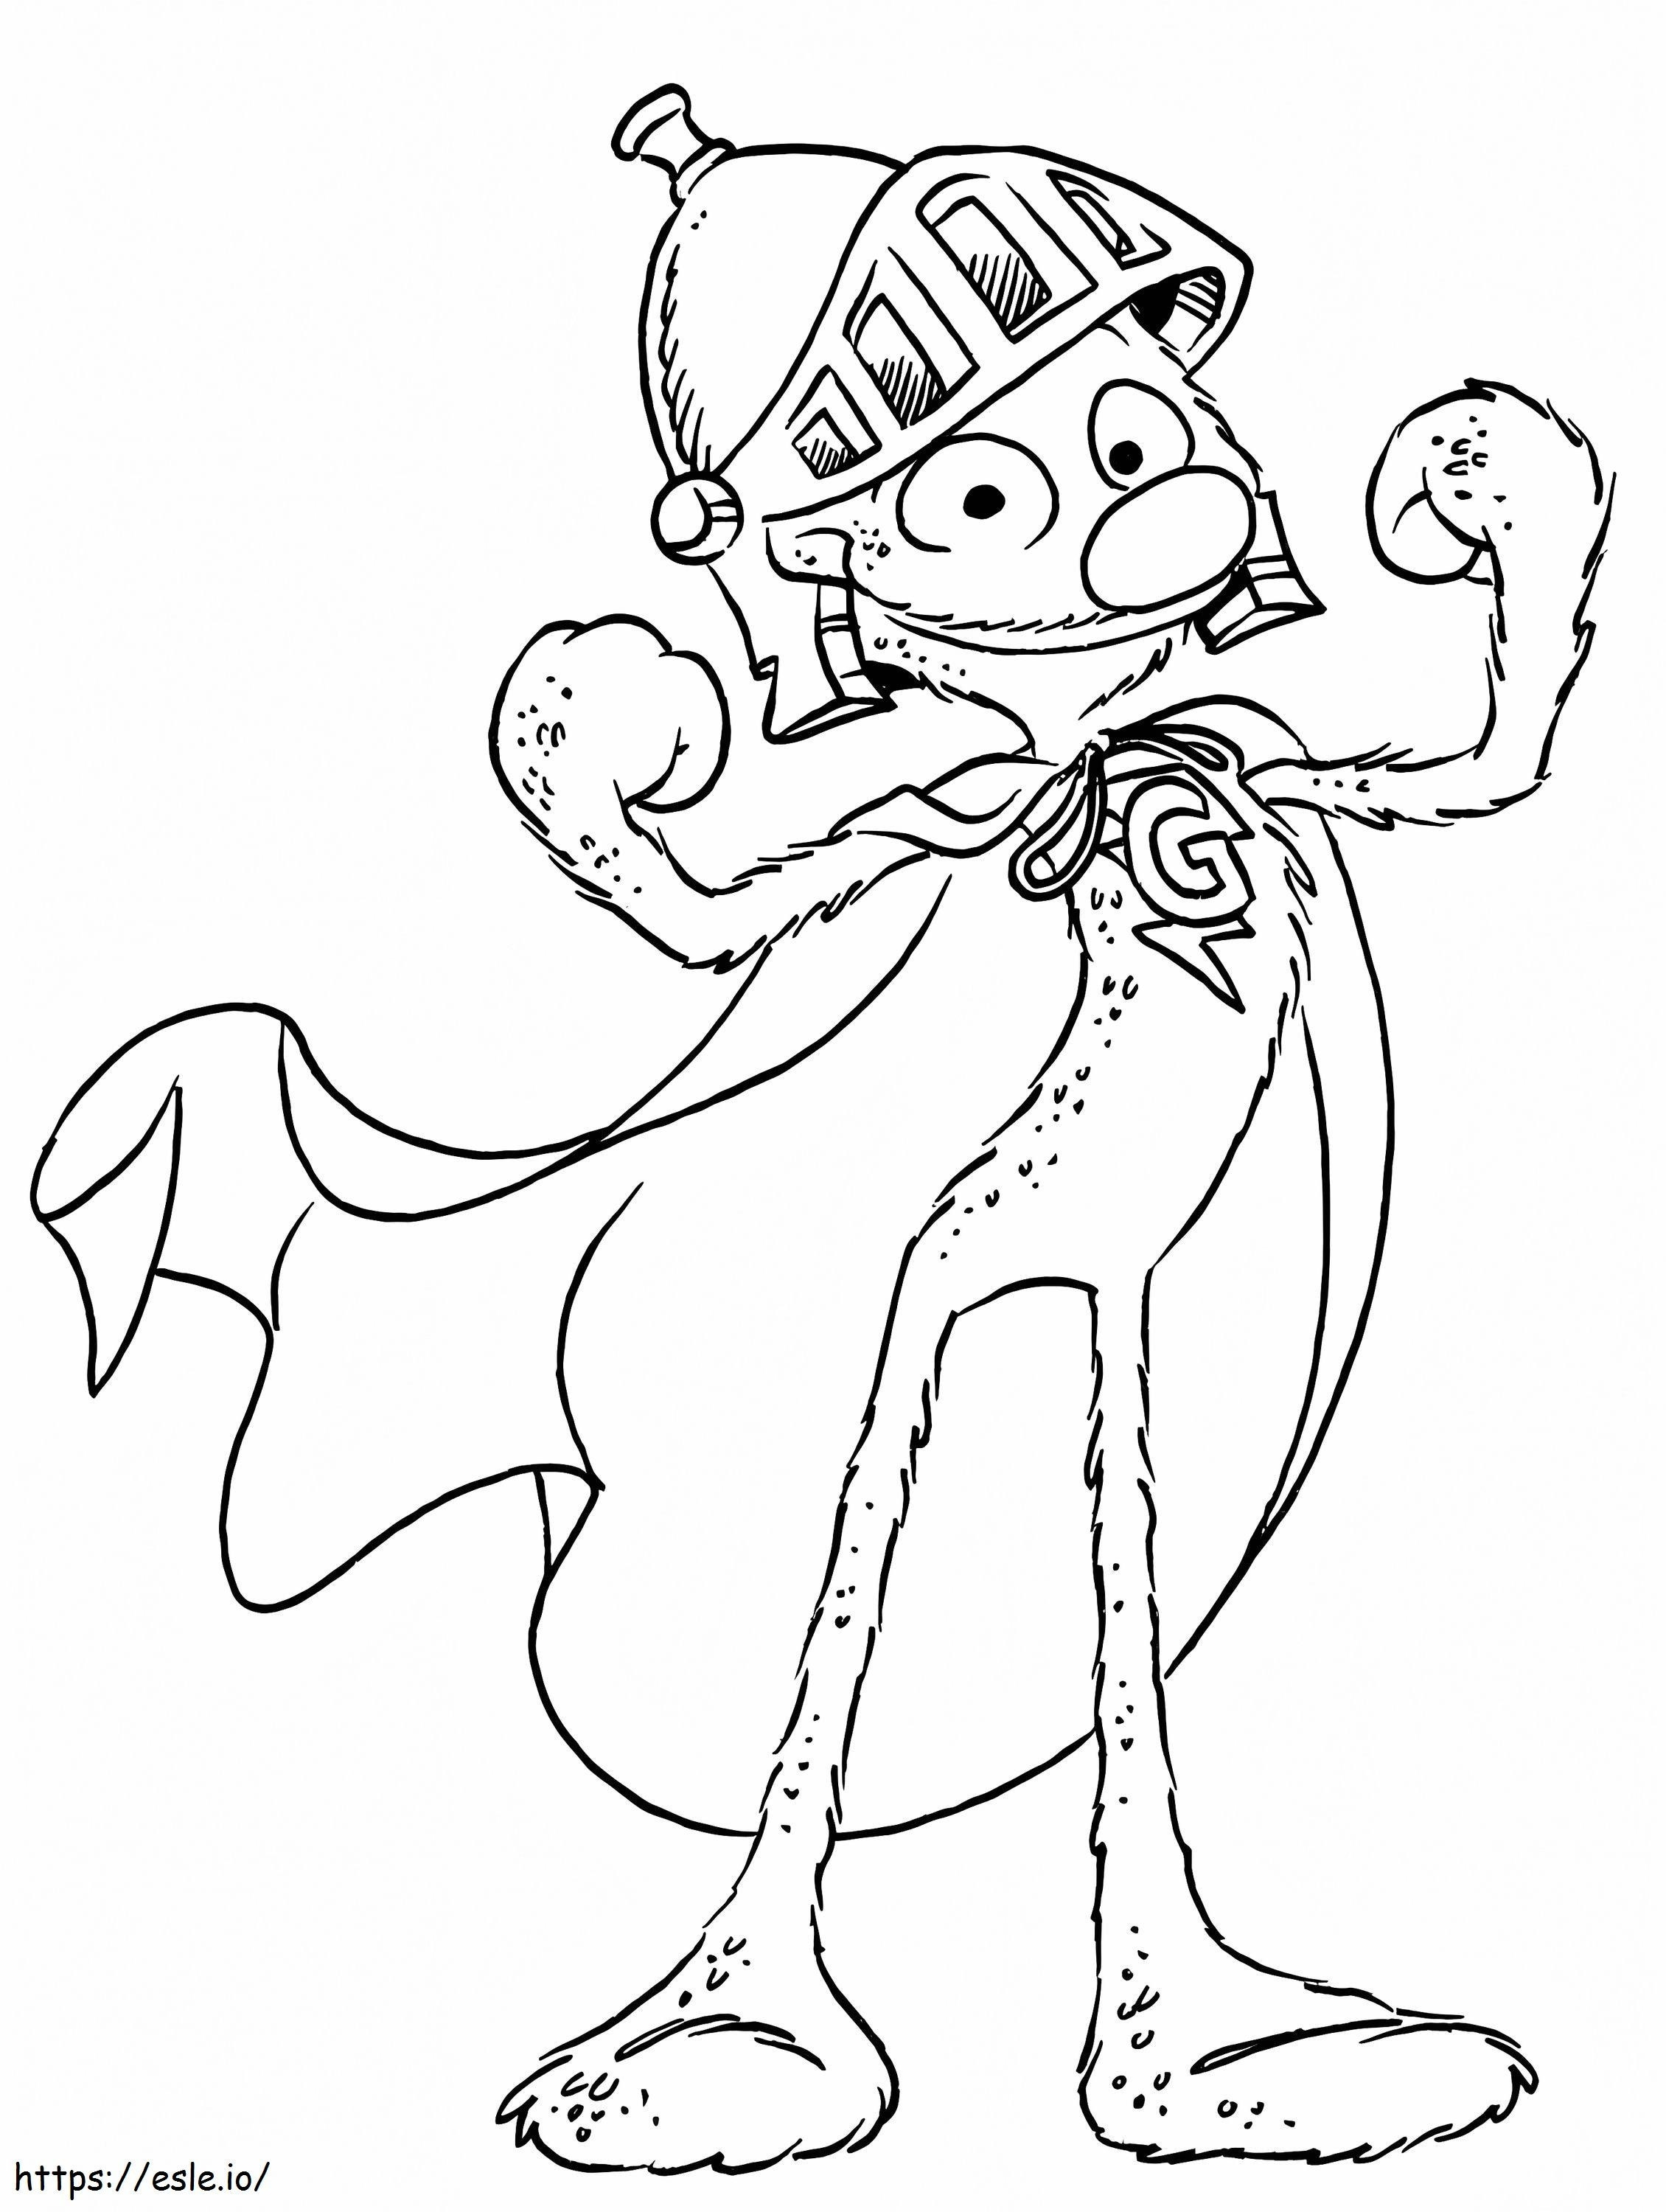 Funny Super Grover coloring page